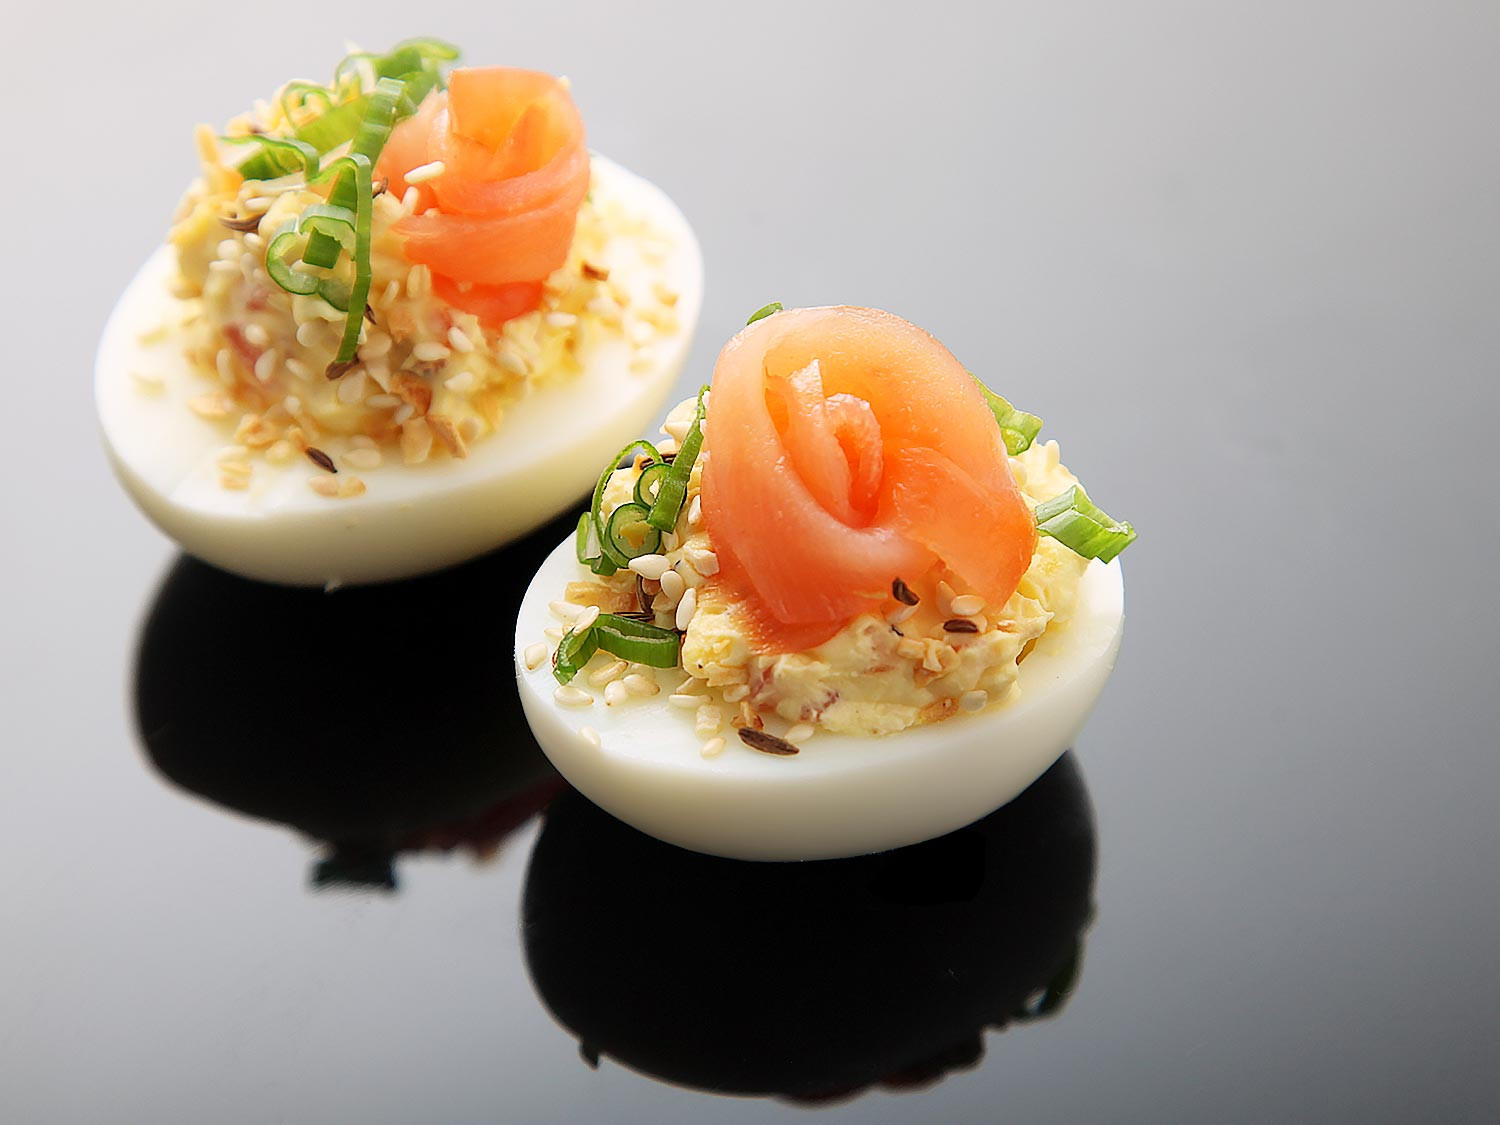 Breakfast Deviled Eggs
 What to Cook for Easter Brunch and Dinner